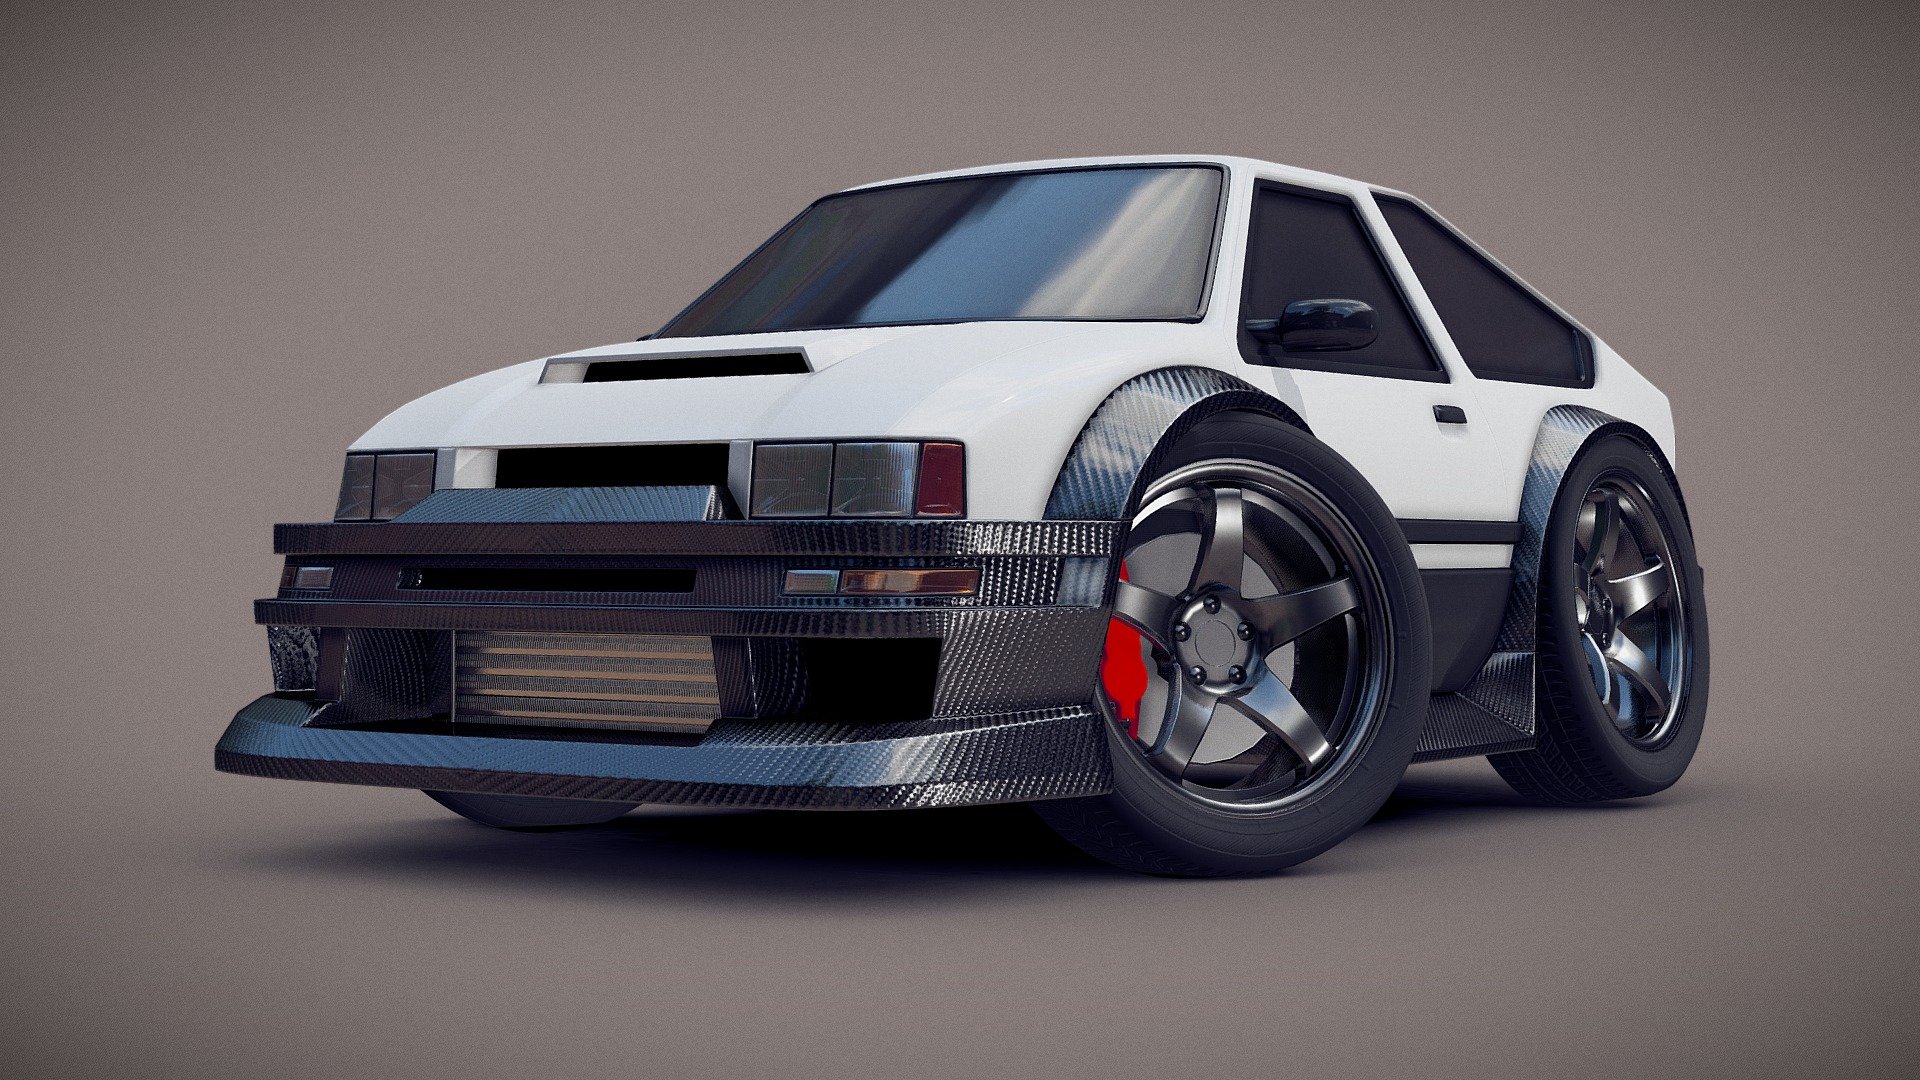 This is my first high-polyish vehicle, and I went with a stylized look. Car was first modeled in Blender, then partly textured in Substance, the rest utilizes mesh materials. Credit is not required, but very appreciated.




Carbon Fiber 2048x2048 = basecolor, metallic, roughness, normal.

Intercooler 2048x2048 = normal.

Lights 2048x2048 = basecolor, normal.

Wheel 2048x2048 = basecolor, metallic, roughness, normal.

If you'd like to support my work, you can donate here: https://ko-fi.com/wallon - Cartoon Car - Download Free 3D model by wallon (@realwallon) 3d model